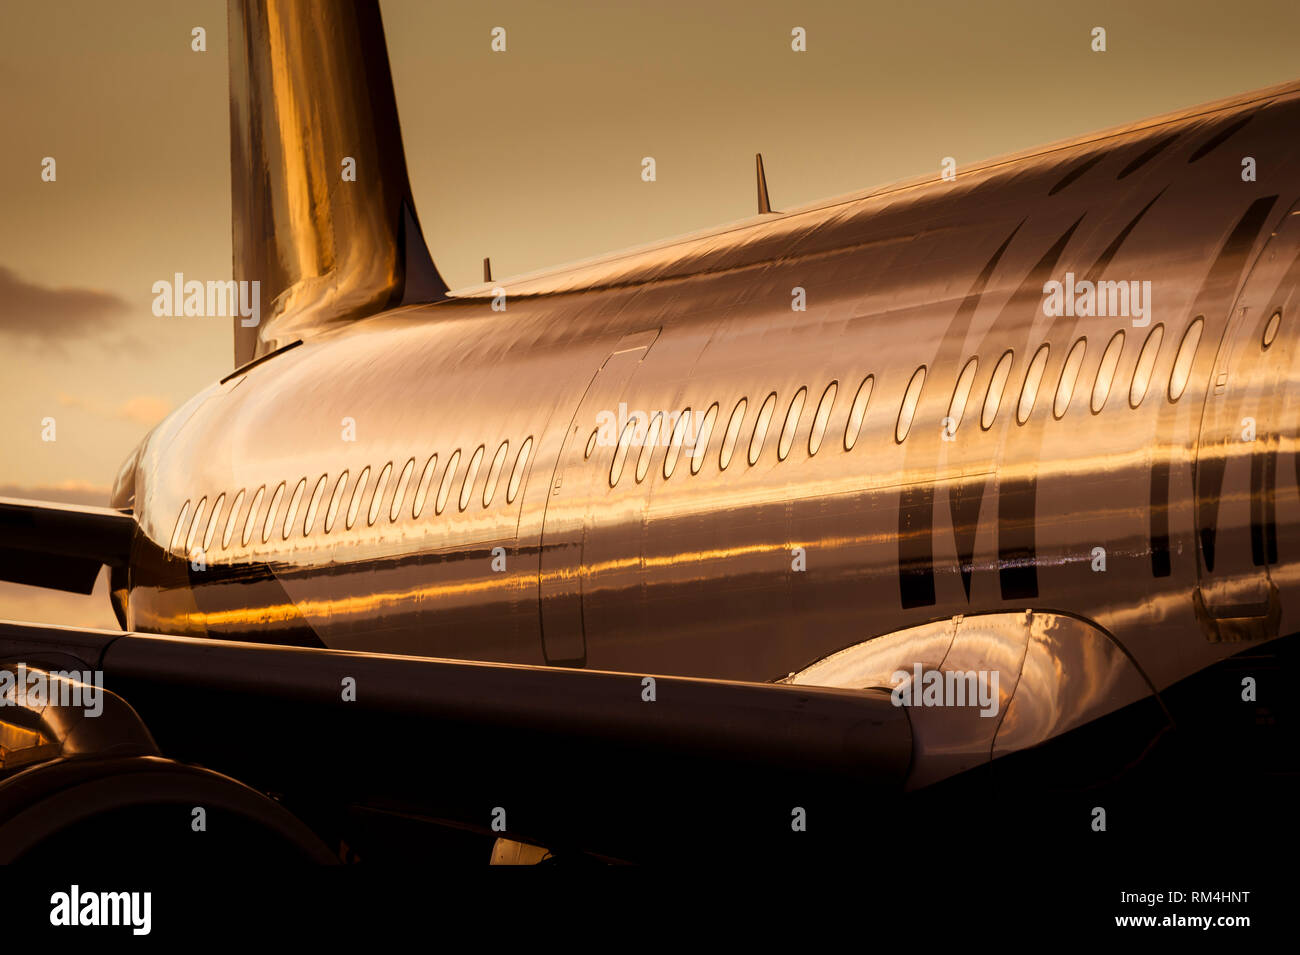 Close up of the tail and emergency exit door of an aircraft waiting on the apron at Gatwick Airport at dusk. Stock Photo